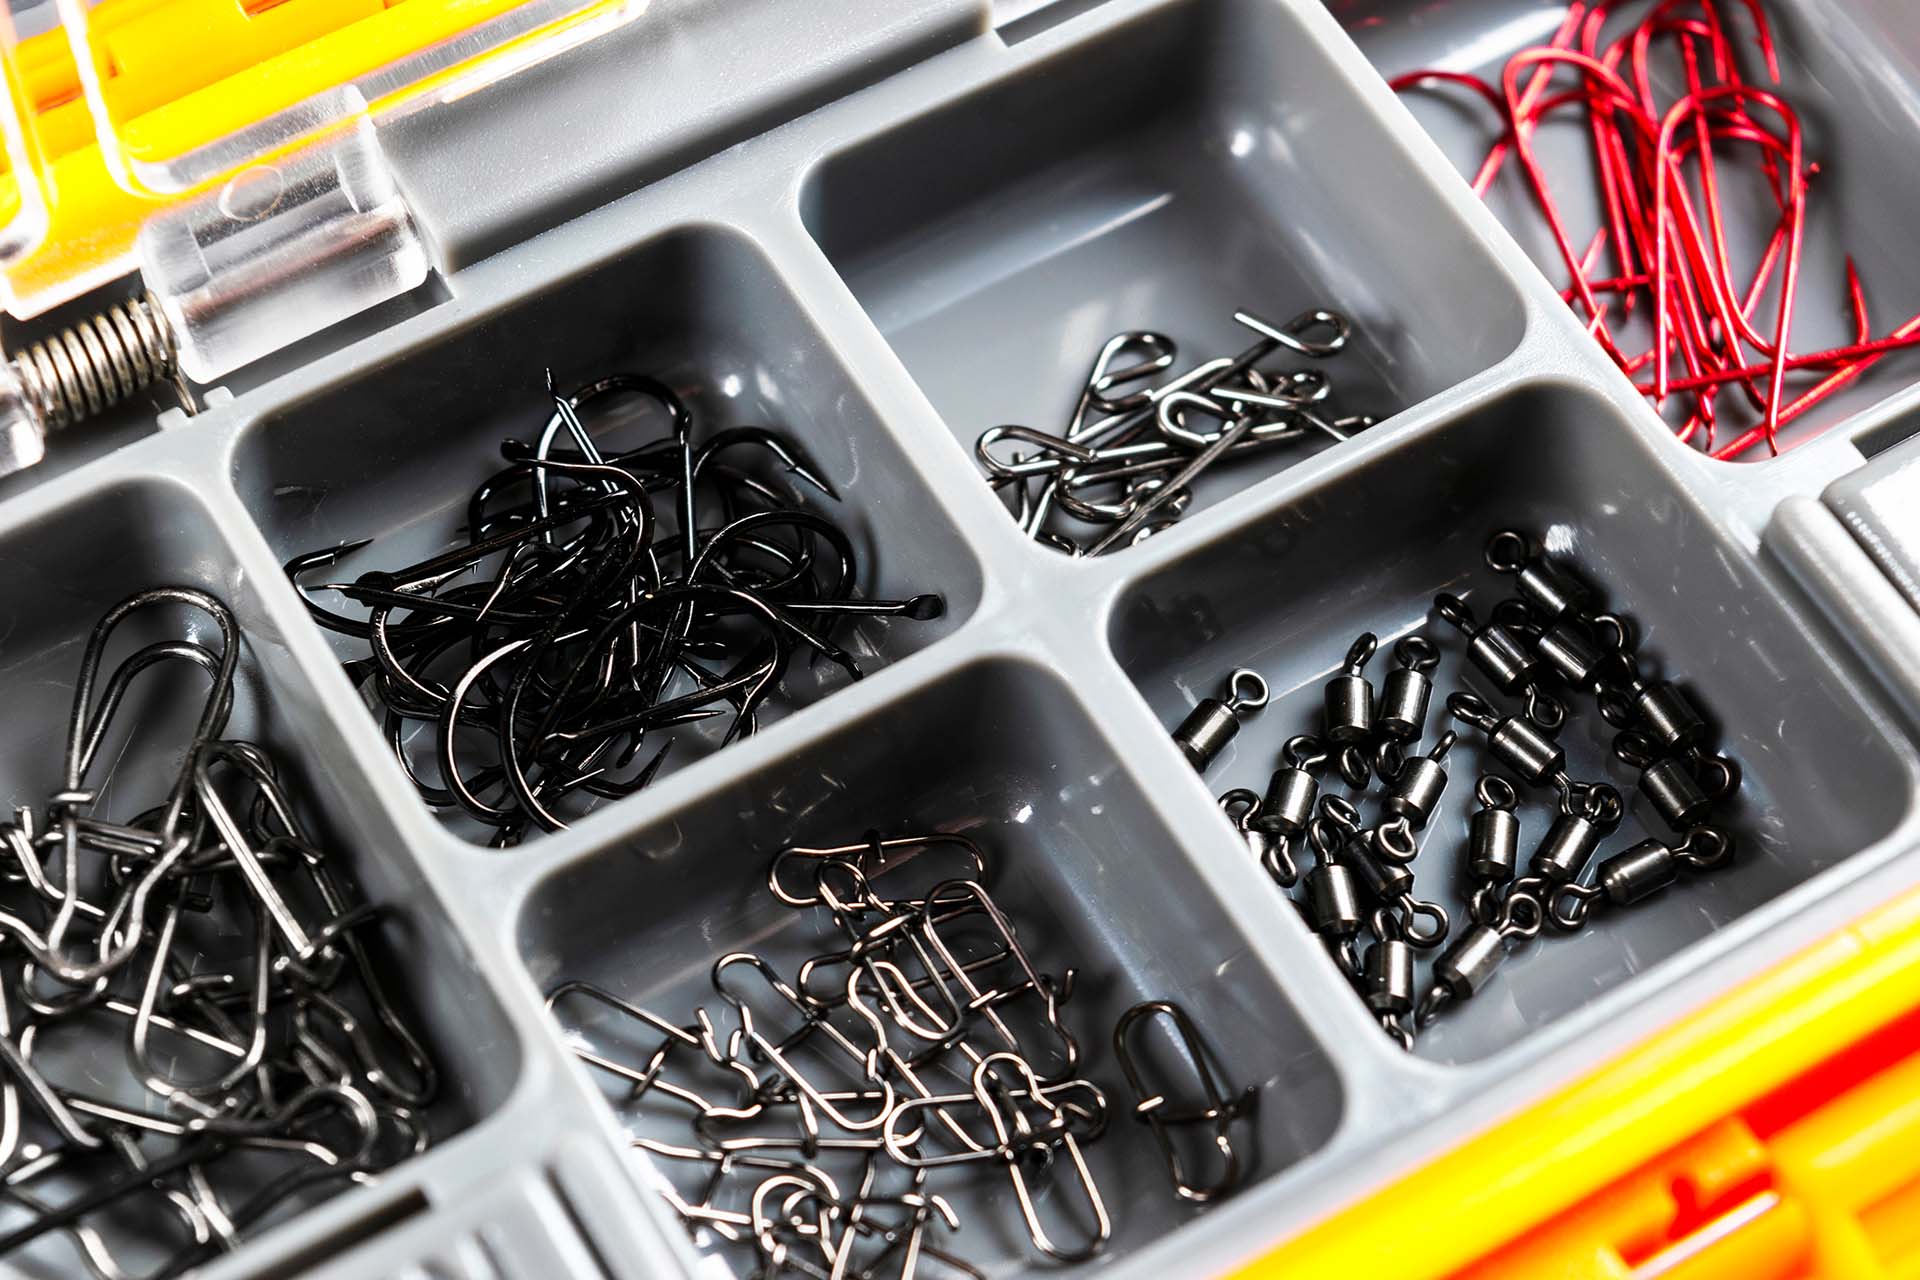 Opened tackle box with fishing hooks and accessories. Fishing hooks in box sections. Case for tackle elements. Fishing accessories background close-up.